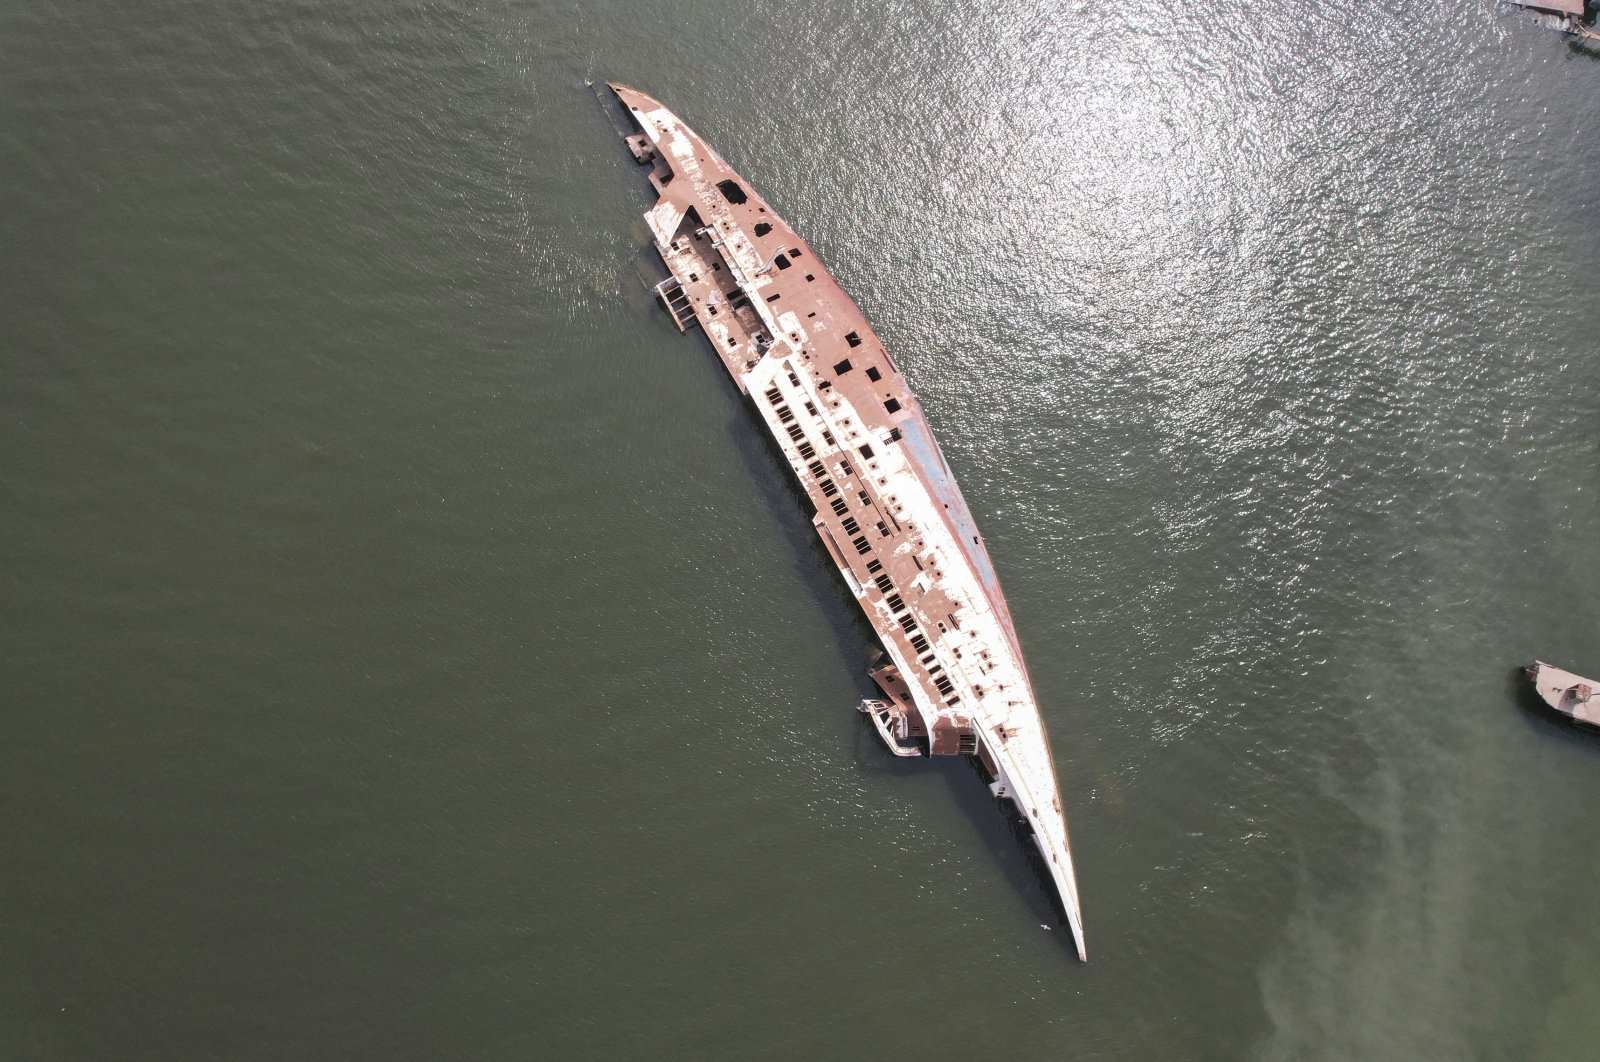 An aerial view of the &quot;Al-Mansur&quot; yacht, once belonging to former Iraqi President Saddam Hussein, which has been lying on the water bed for years in the Shatt al-Arab waterway, Basra, Iraq, March 9, 2023. (Reuters Photo)